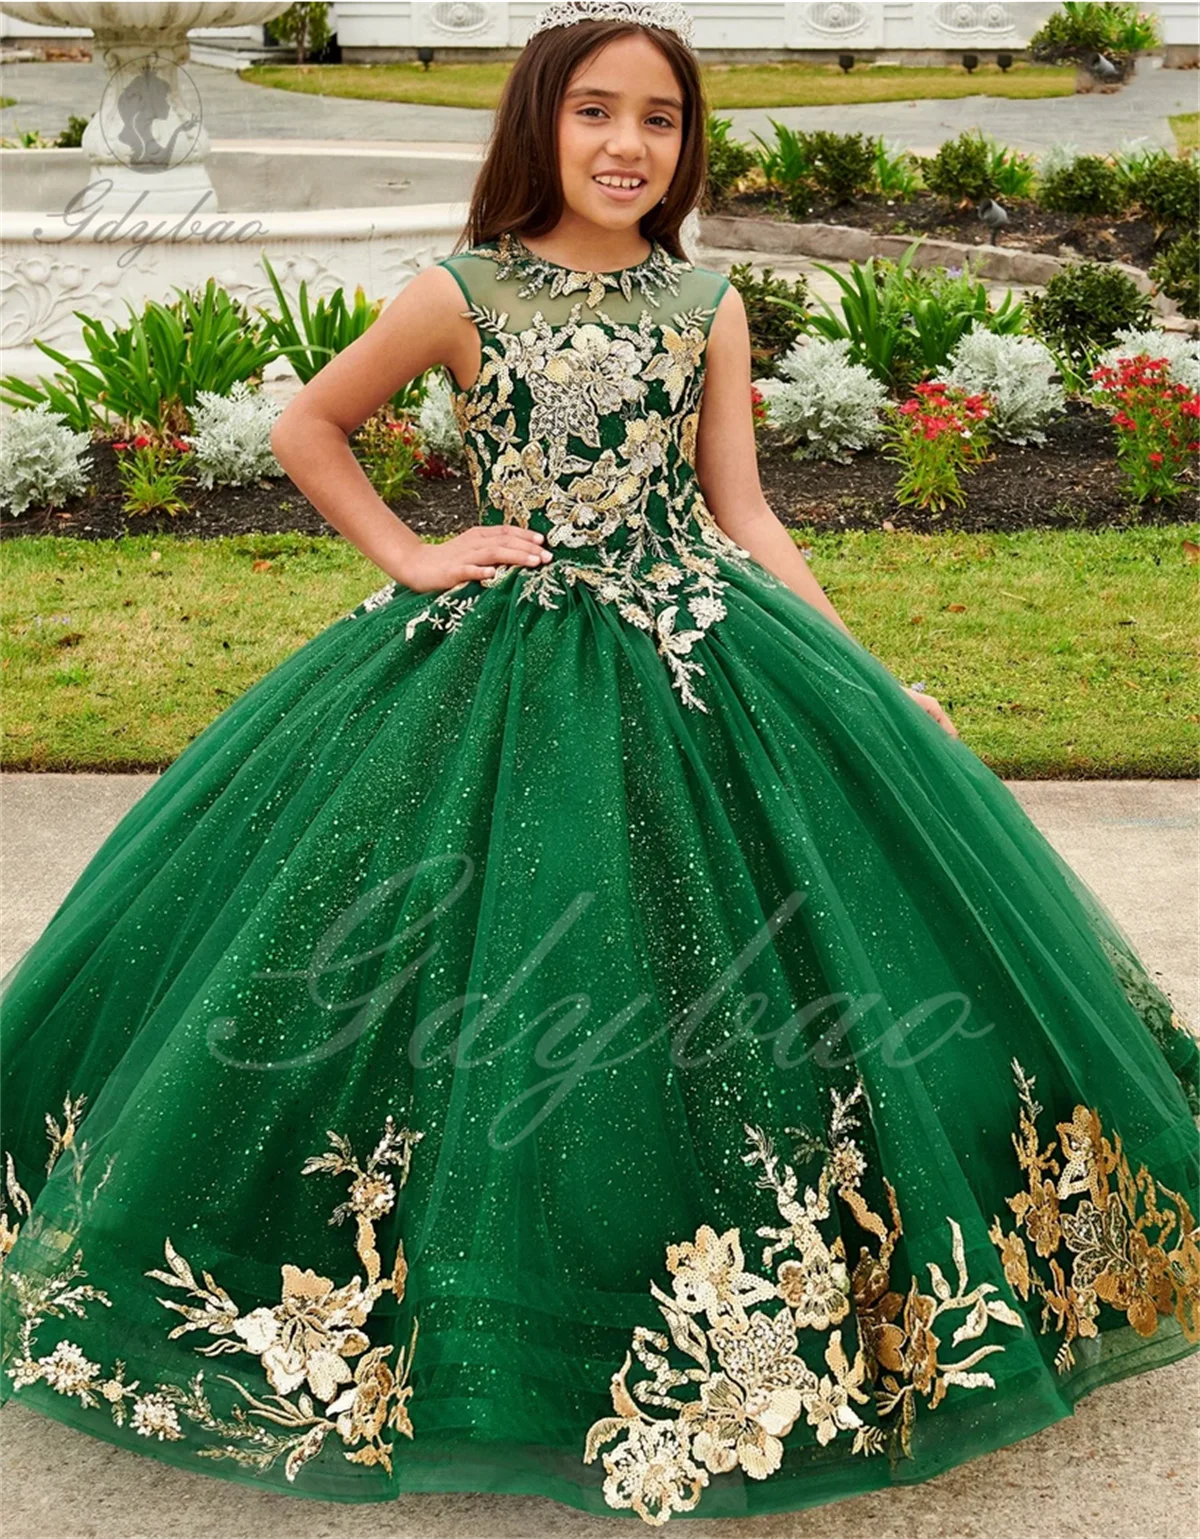 

Green Flower Girl Dresses Gold Appliques for Wedding Long Tulle Pageant Ball Gown Birthday Princess Party Girl Dress